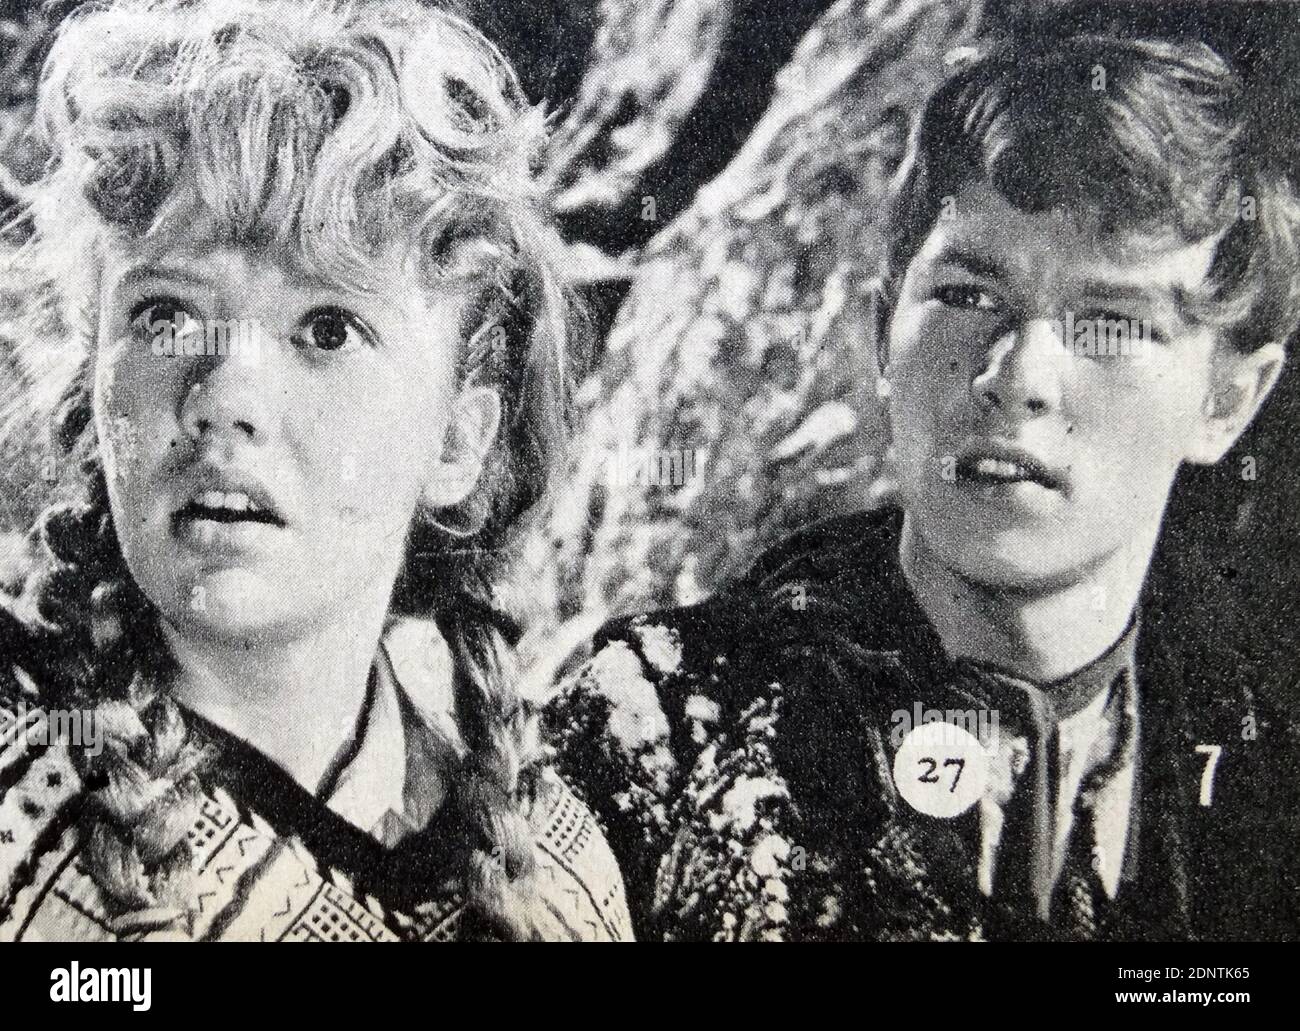 Film still of Michael Anderson (1943-) and Hayley Mills (1946-) from 'In Search of the Castaways'. Stock Photo